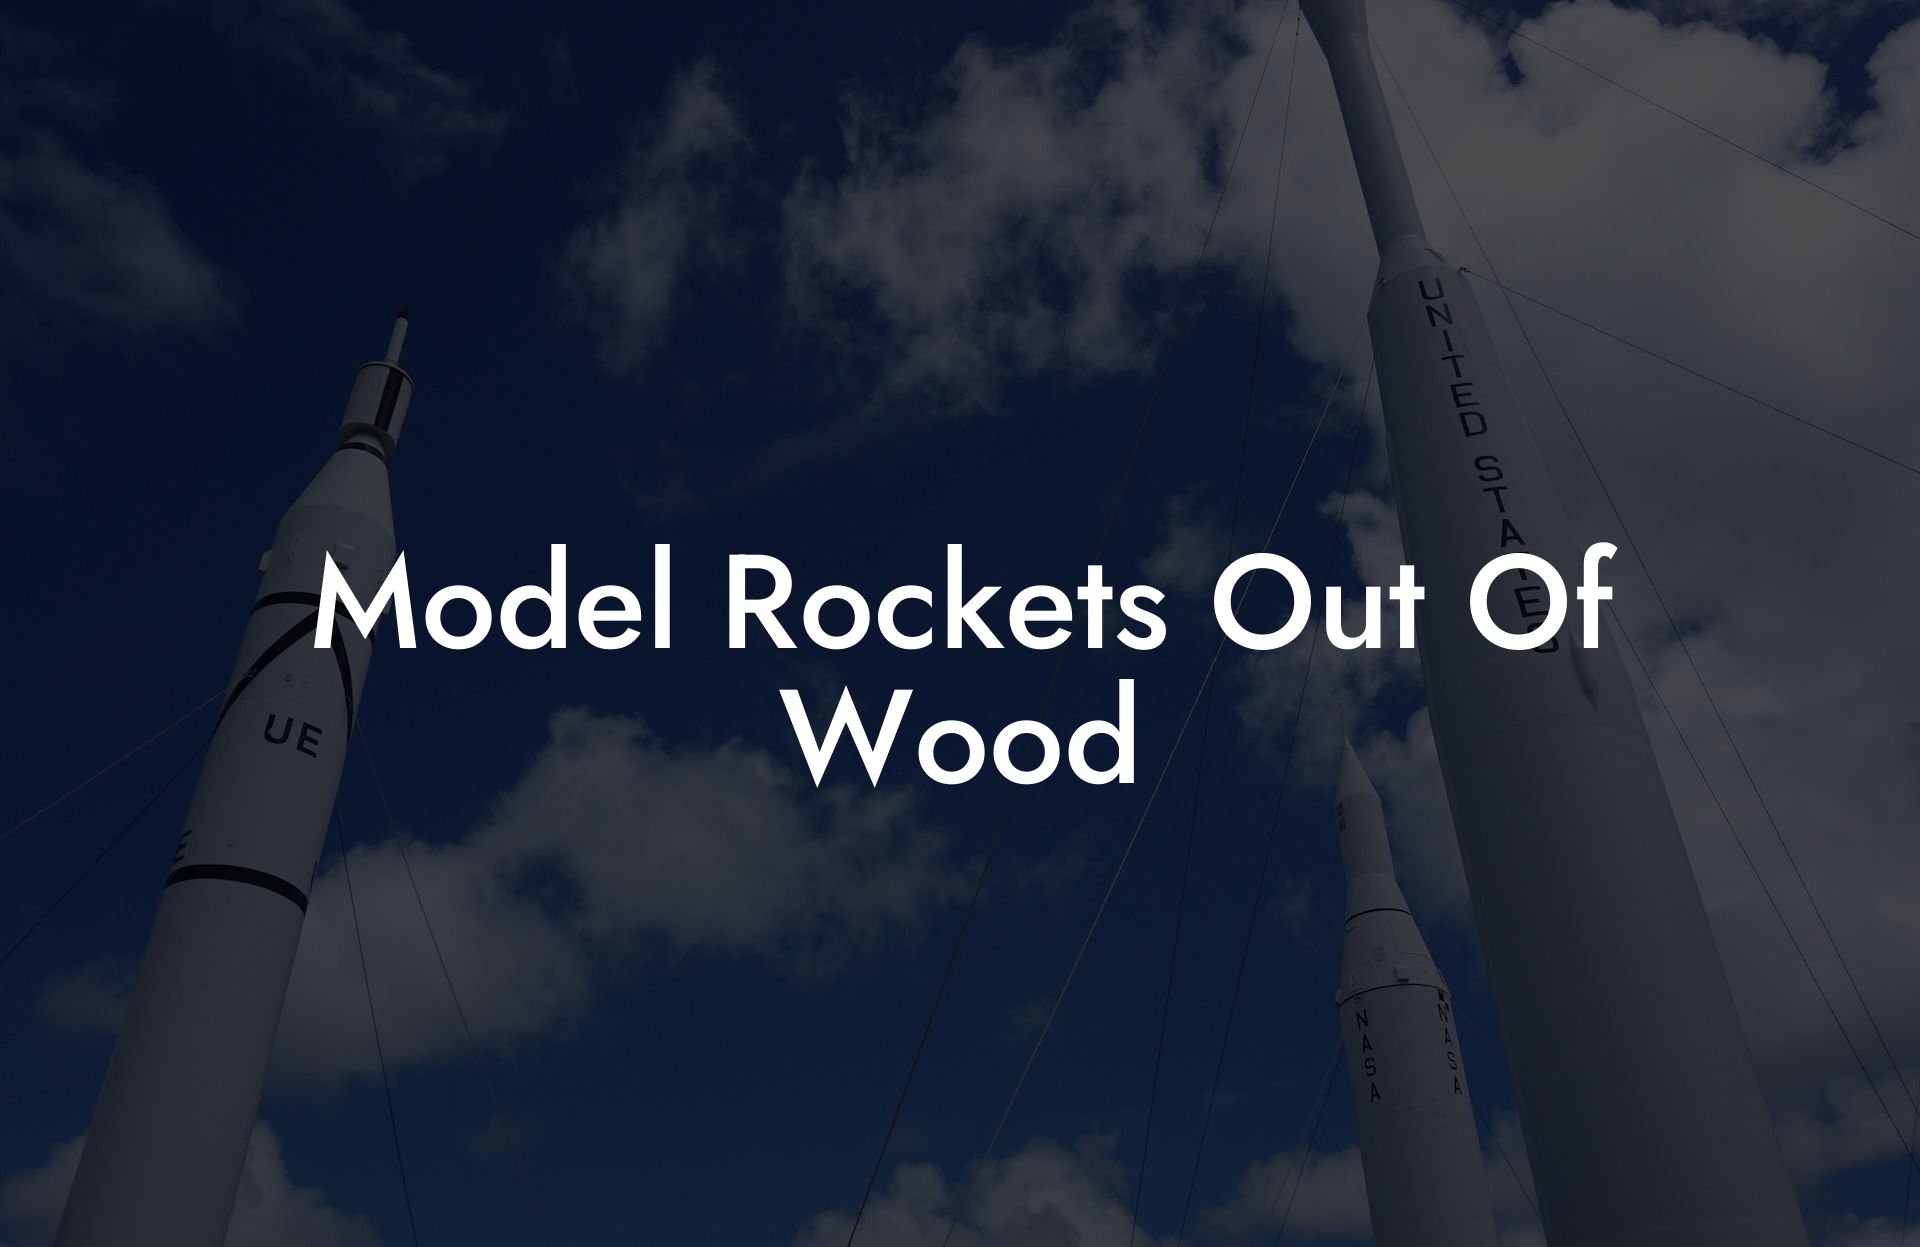 Model Rockets Out Of Wood